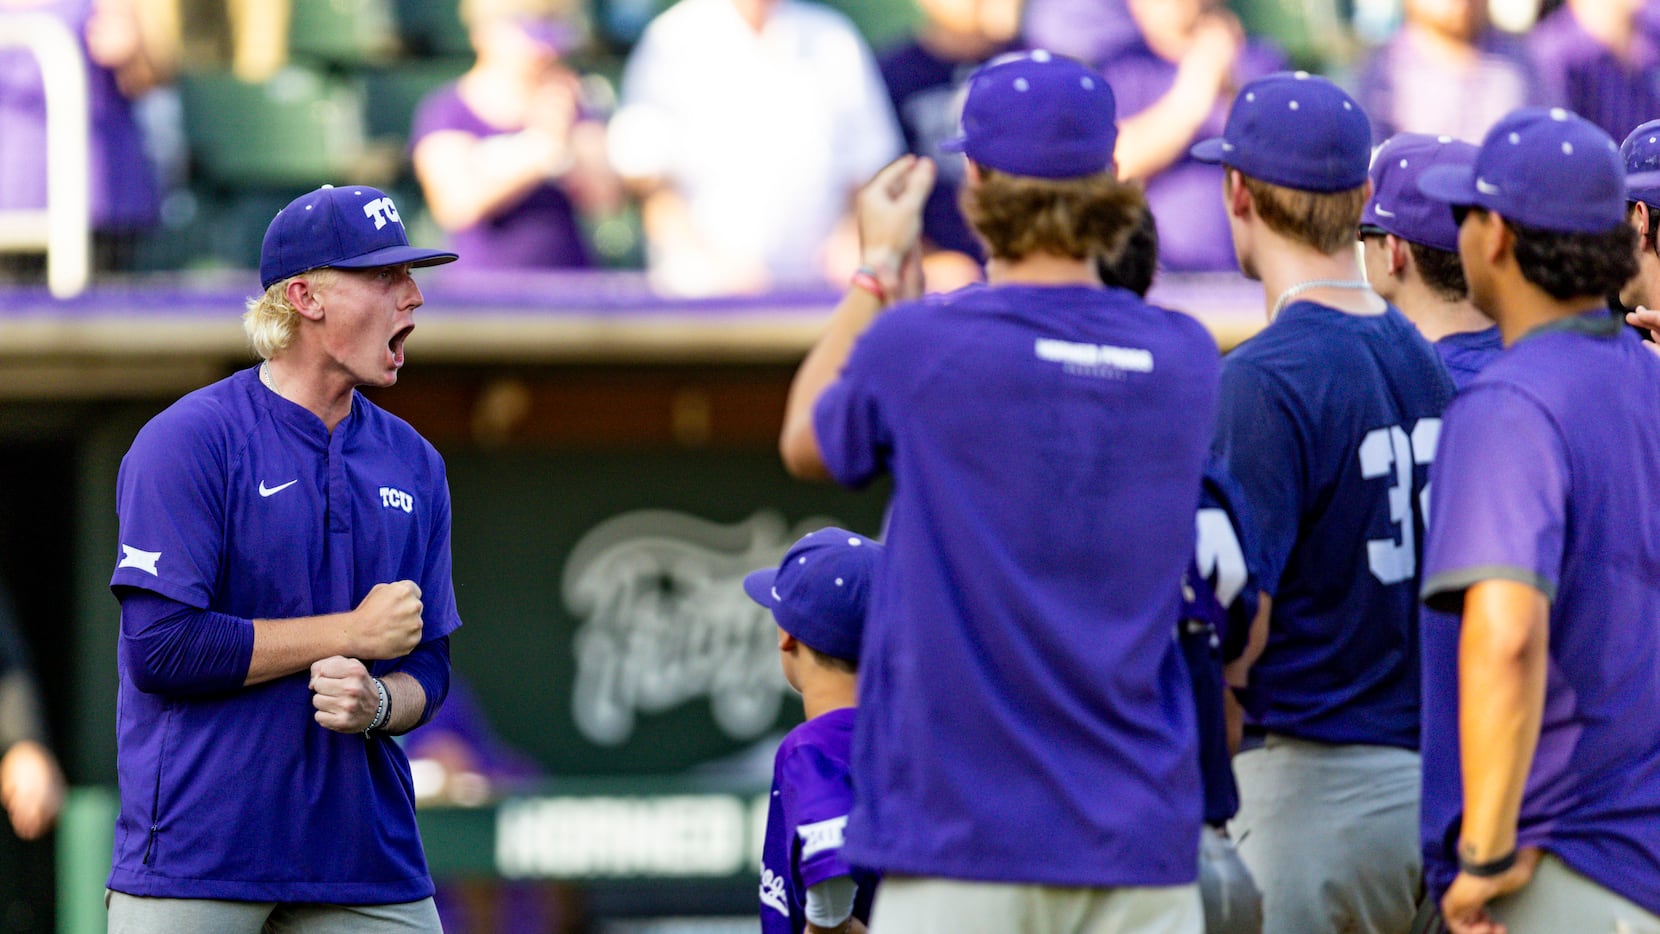 Omaha bound: What to know about TCU baseball's run to the College